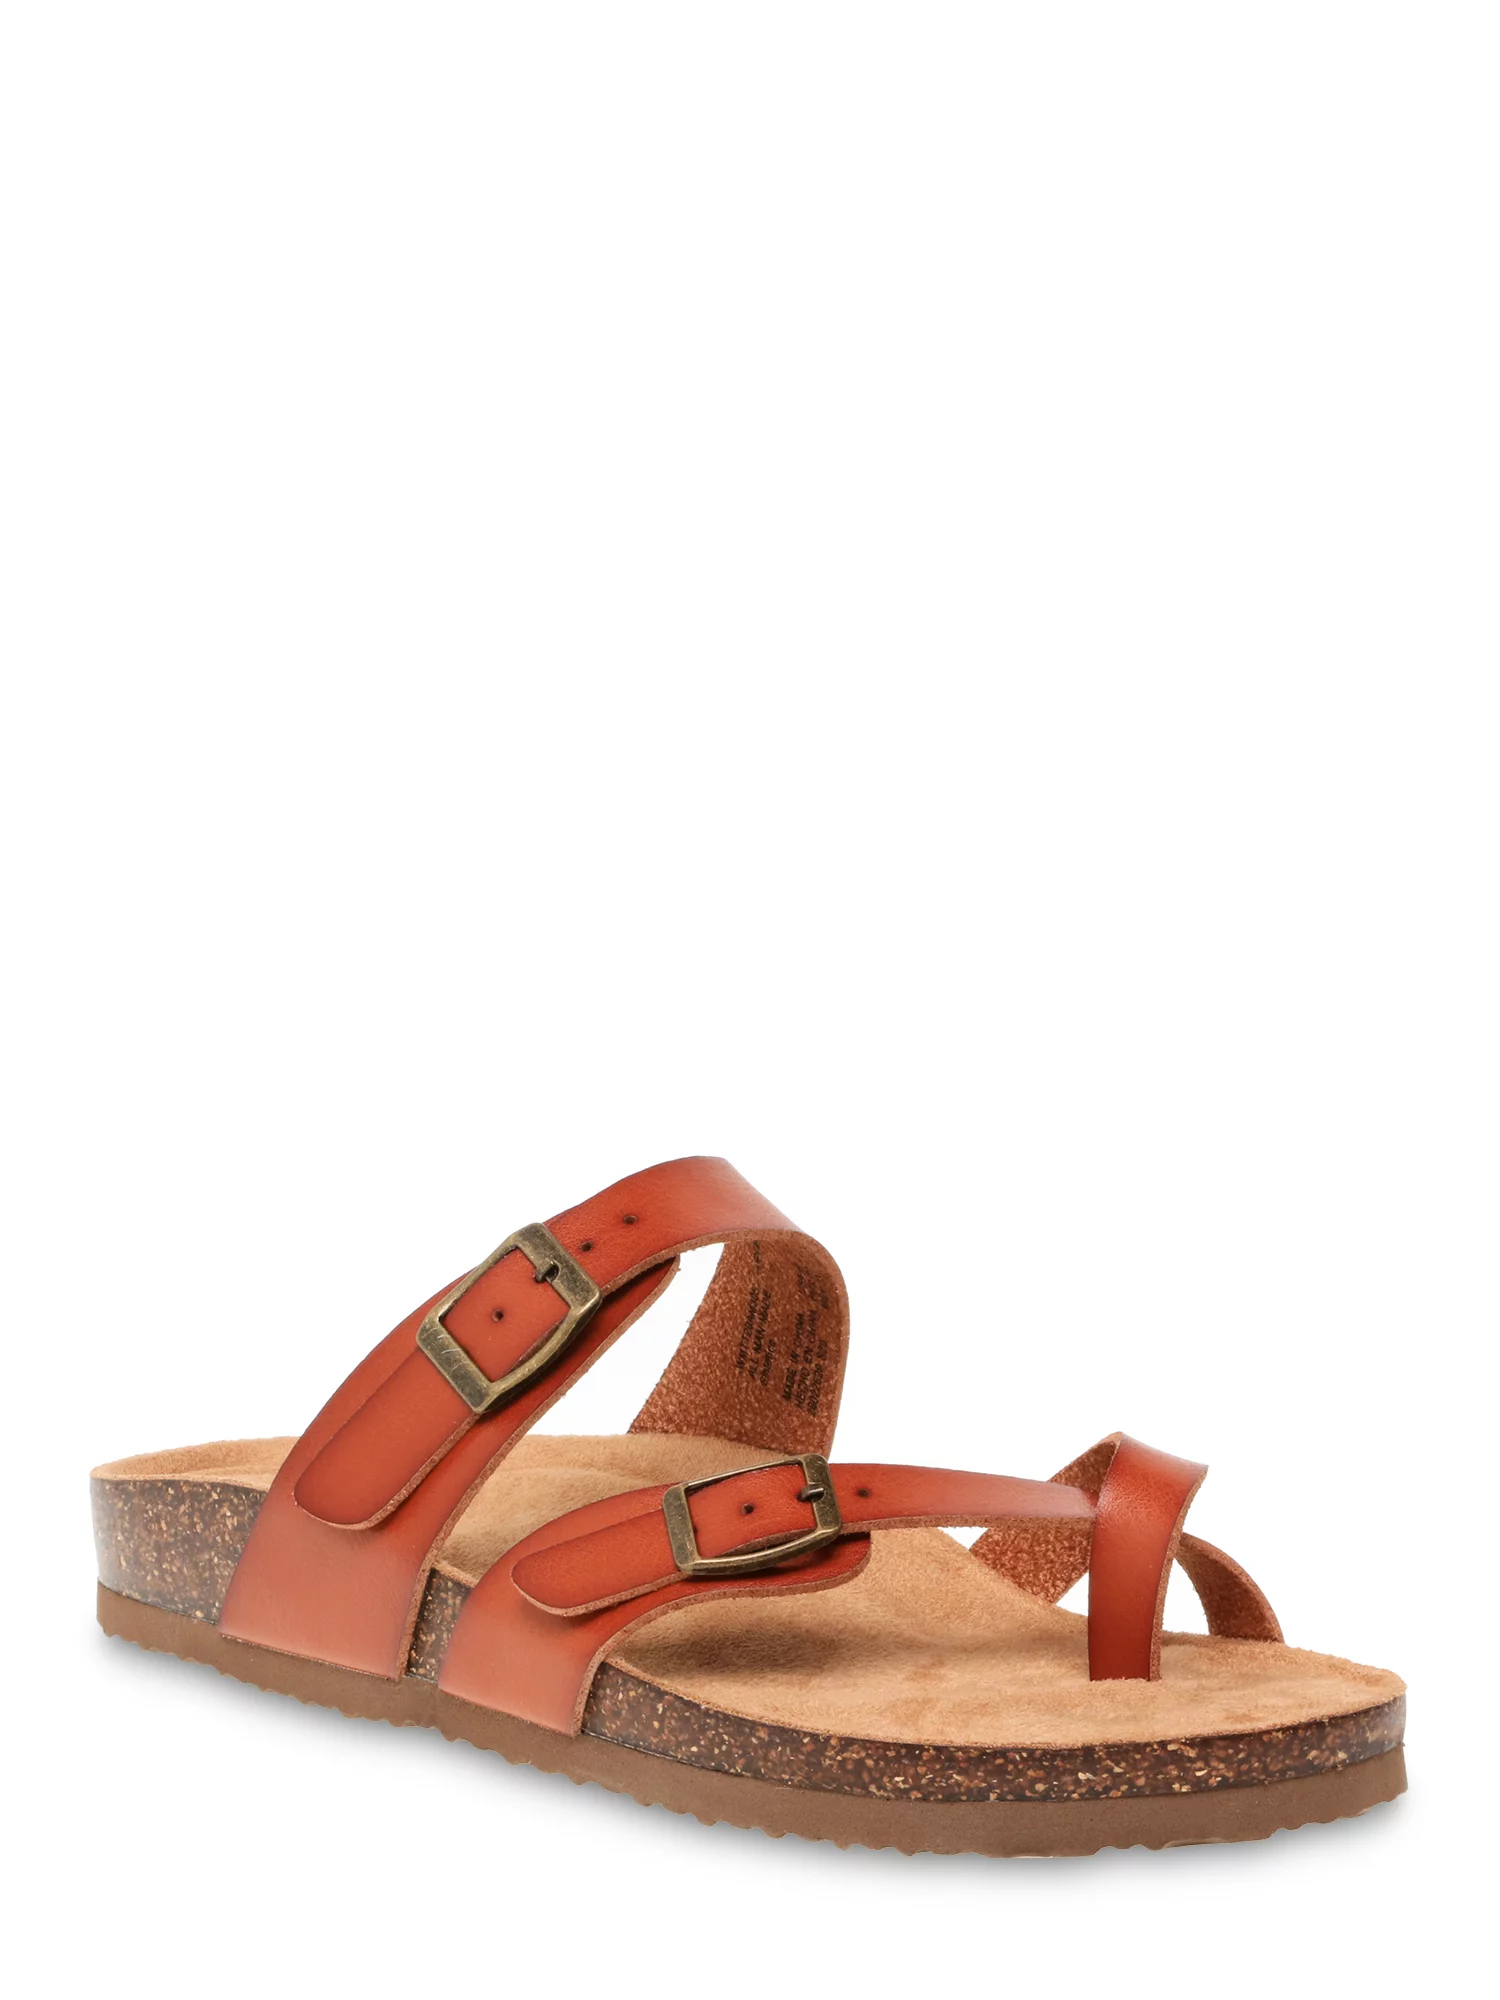 Time and Tru Footbed Thong Slide Sandal (Women's) (Wide Width Available)